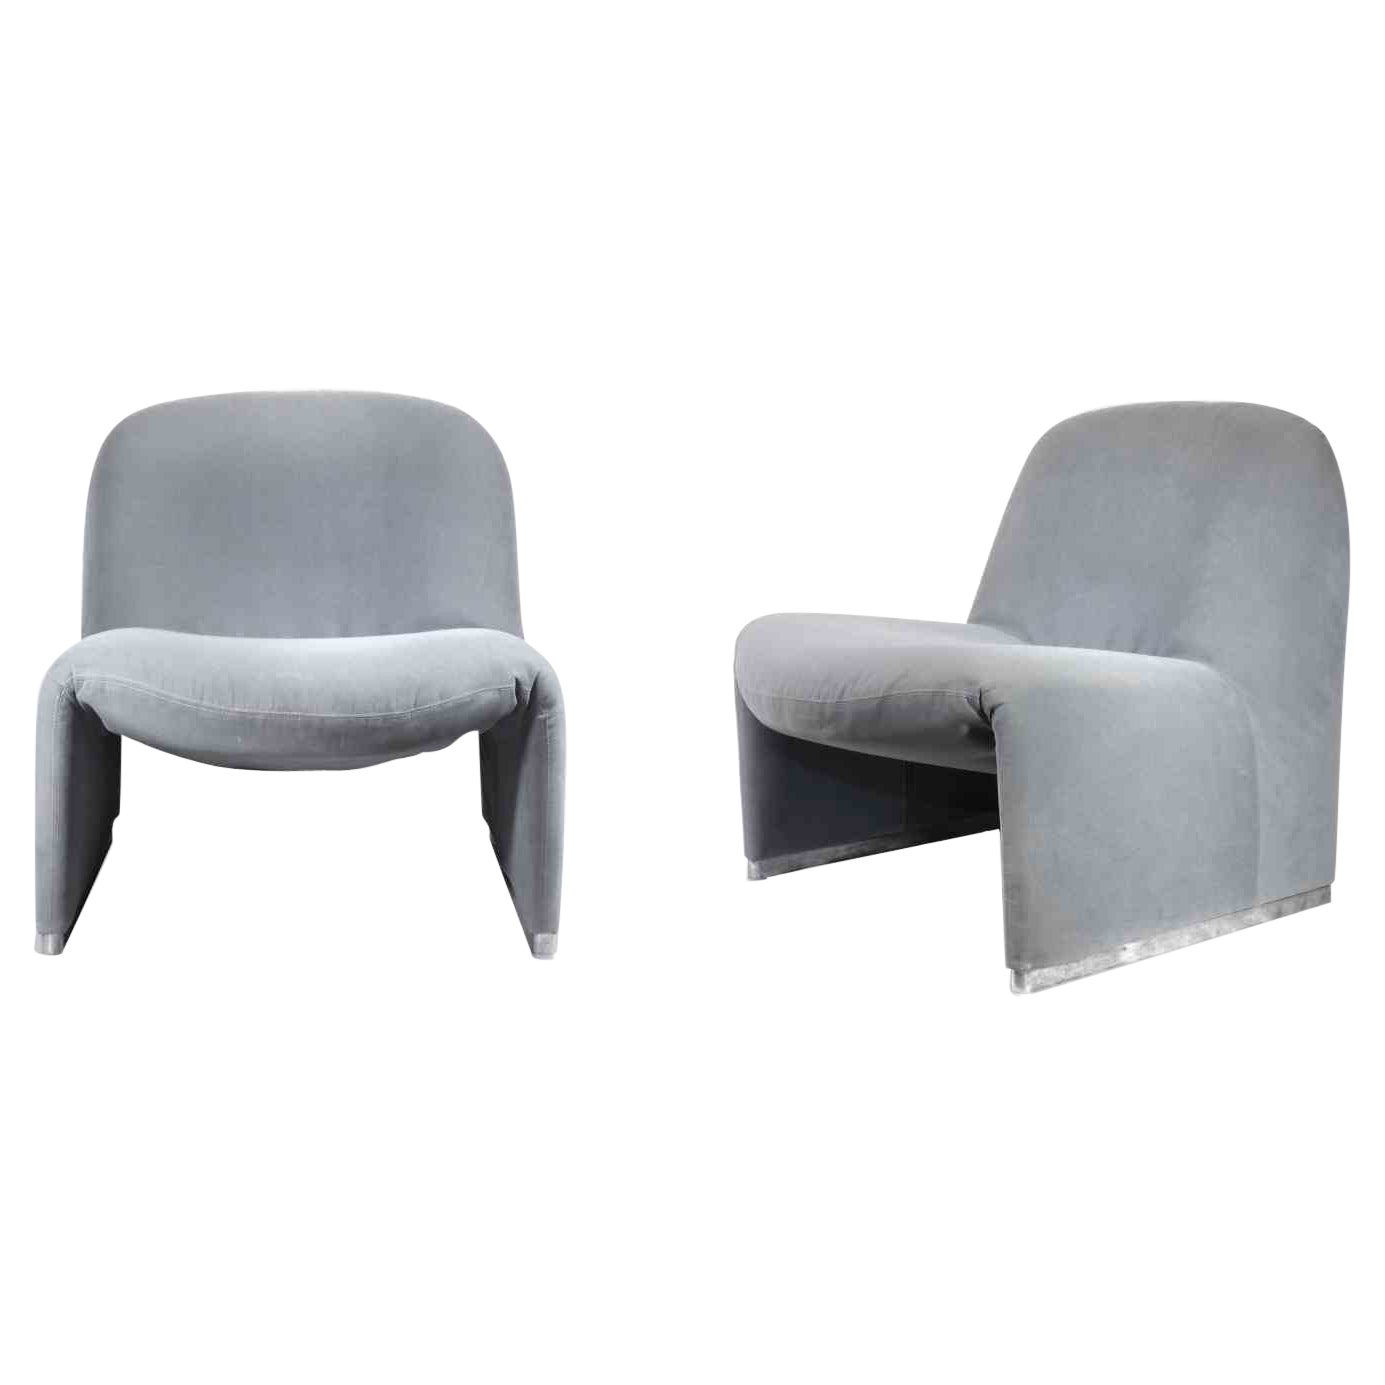 Pair of Alky Armchairs by Giancarlo Piretti for Castelli, Italy, 1972 For Sale